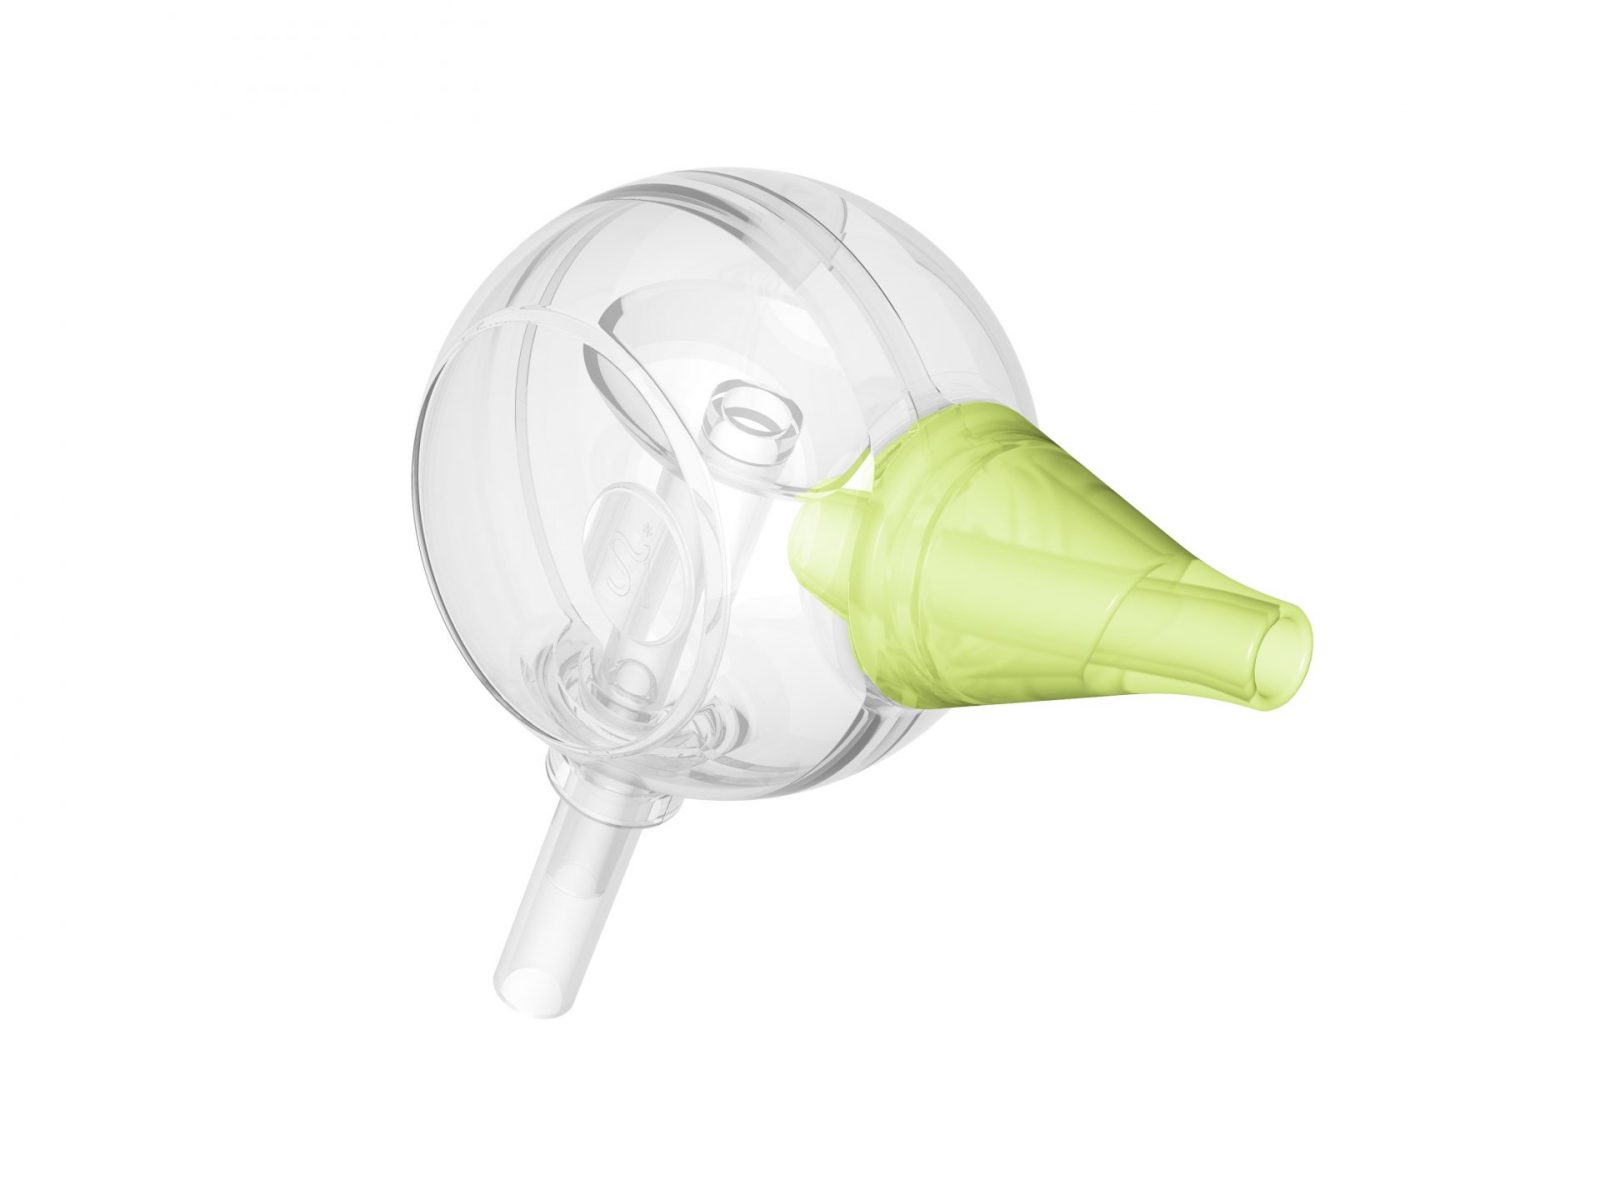 A Colibri head used in Nosiboo Pro and Nosiboo Eco nasal aspirators for collecting the nasal secretion